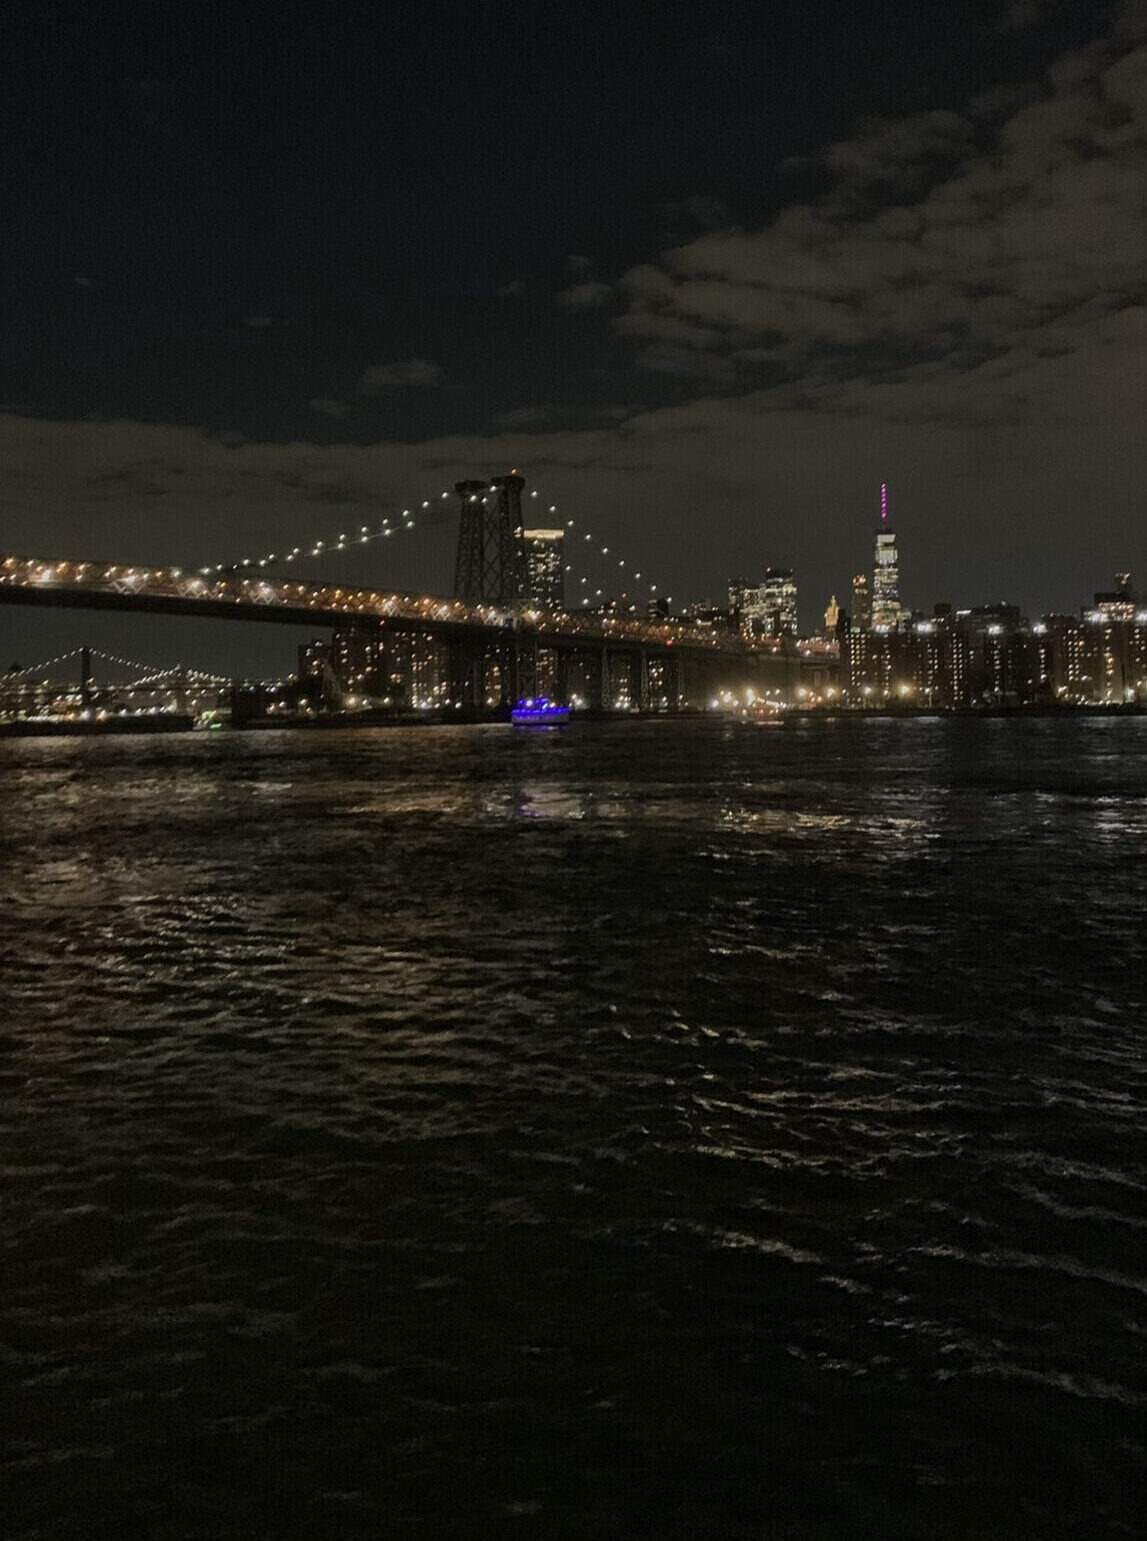 The city skyline with a bridge from the East River at night.